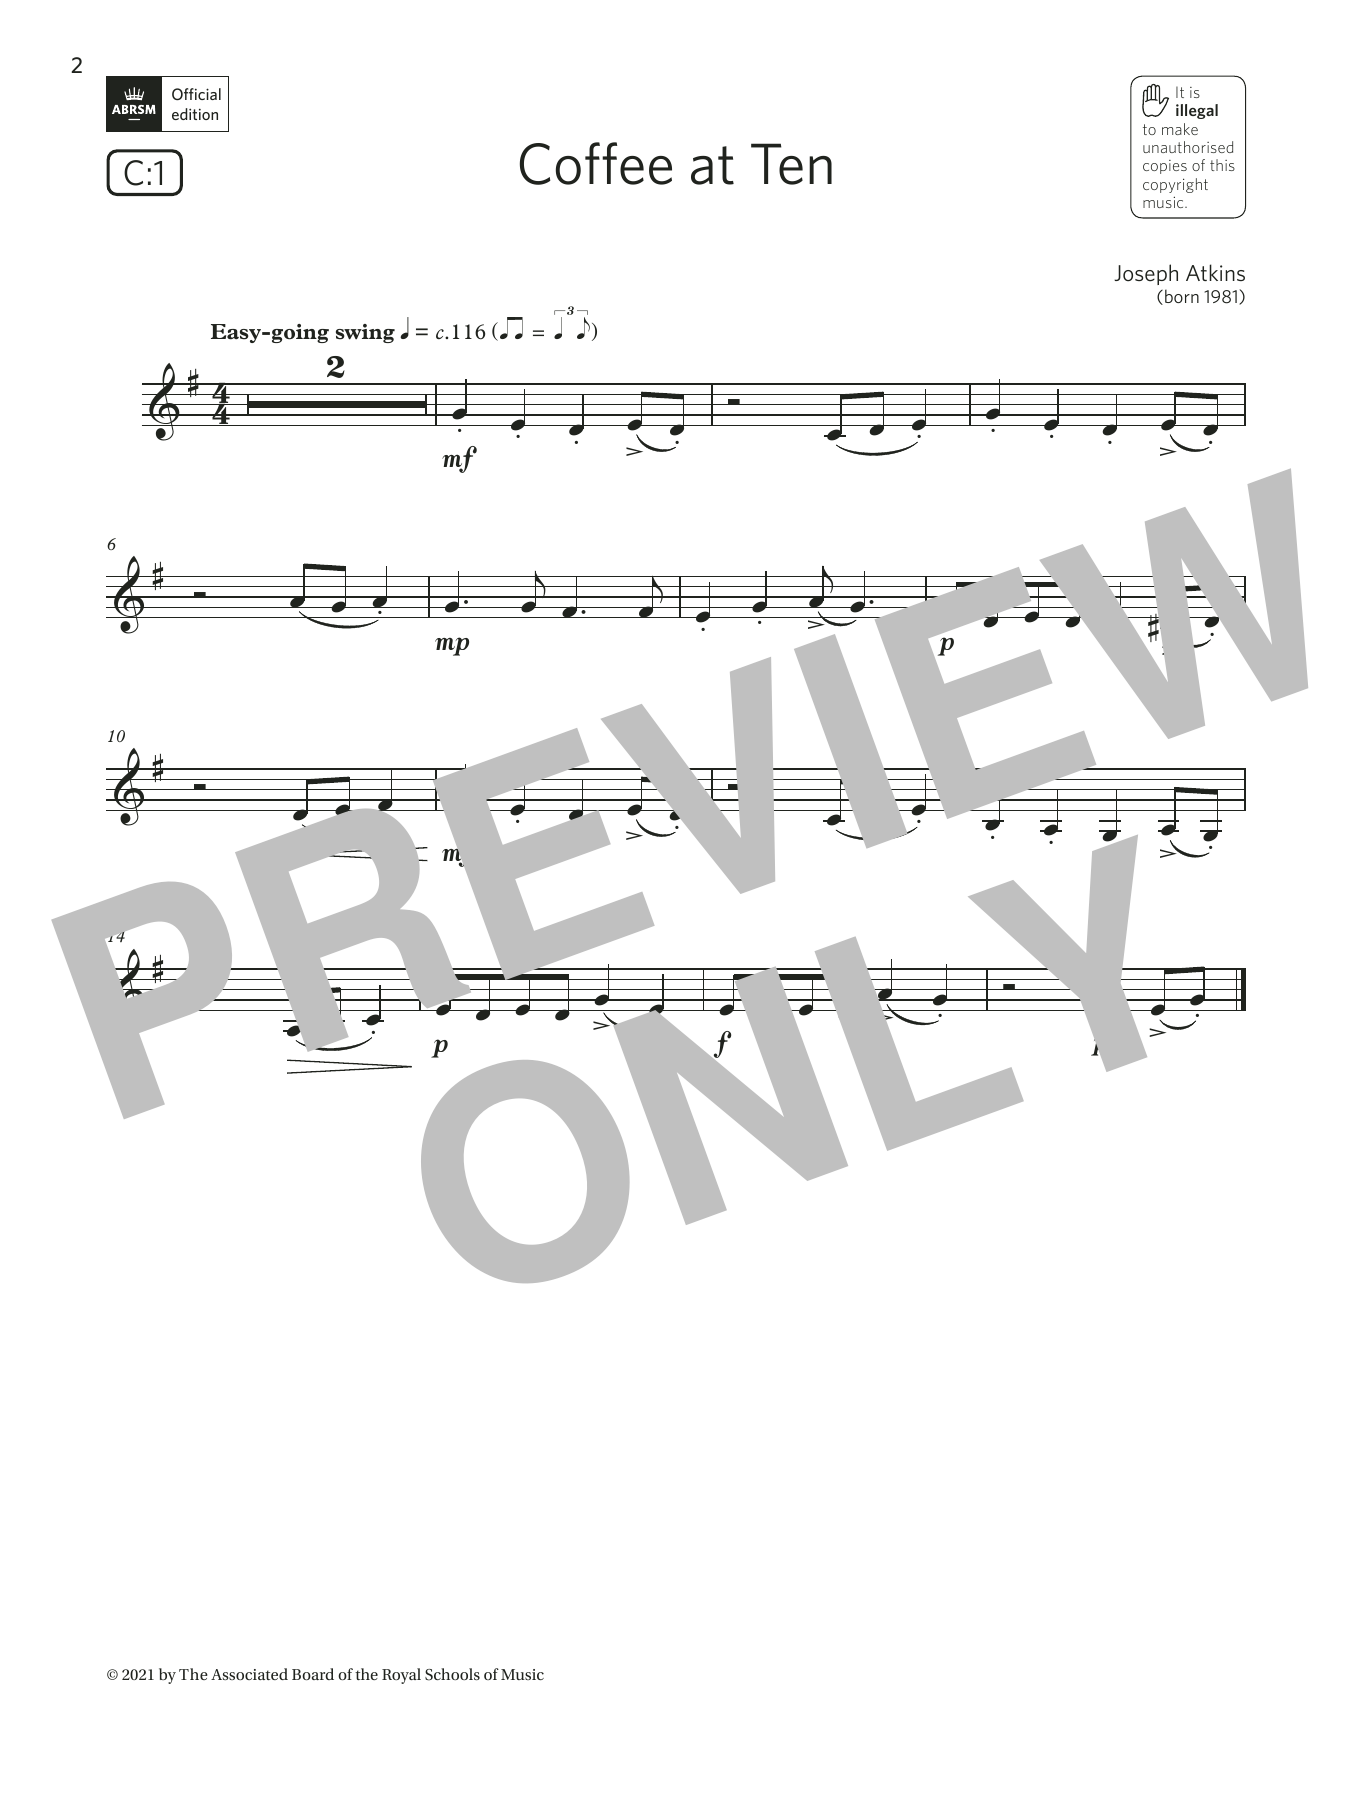 Download Joseph Atkins Coffee at Ten (Grade 1 List C1 from the Sheet Music